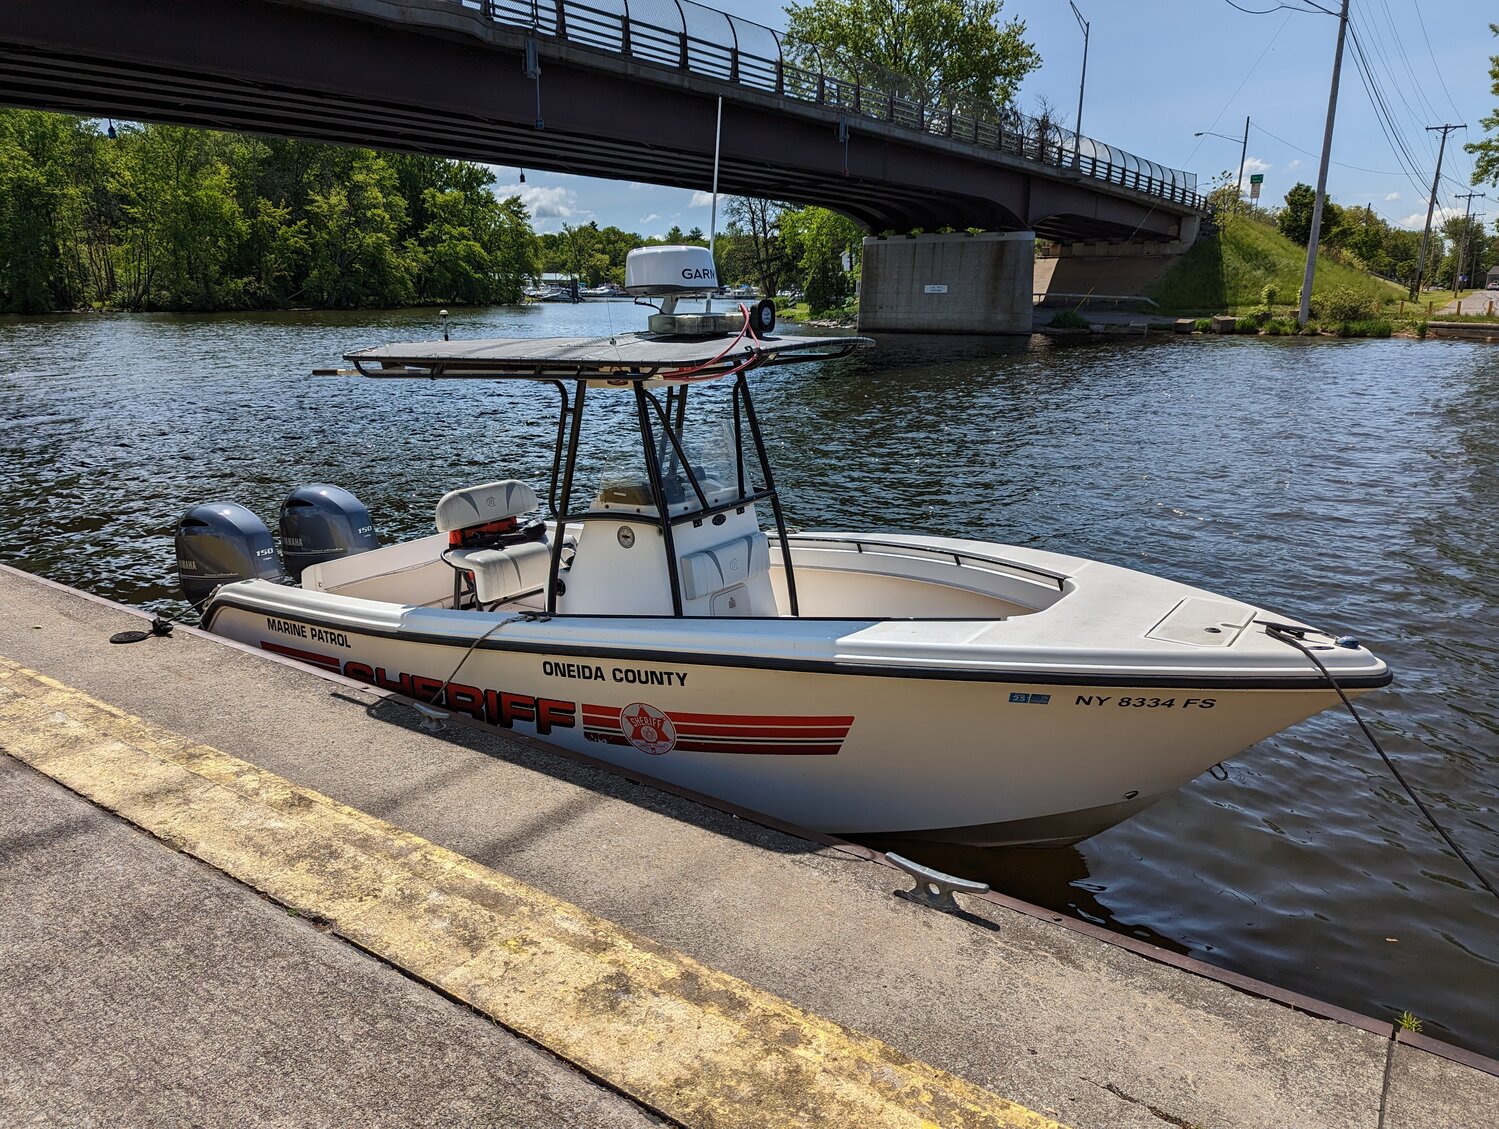 One of five vessels in operation by the Oneida County Sheriff's Marine Patrol. The Sheriff's Office will be patrolling Oneida Lake for Memorial Day Weekend, and will have a presence on all county lakes throughout the summer.